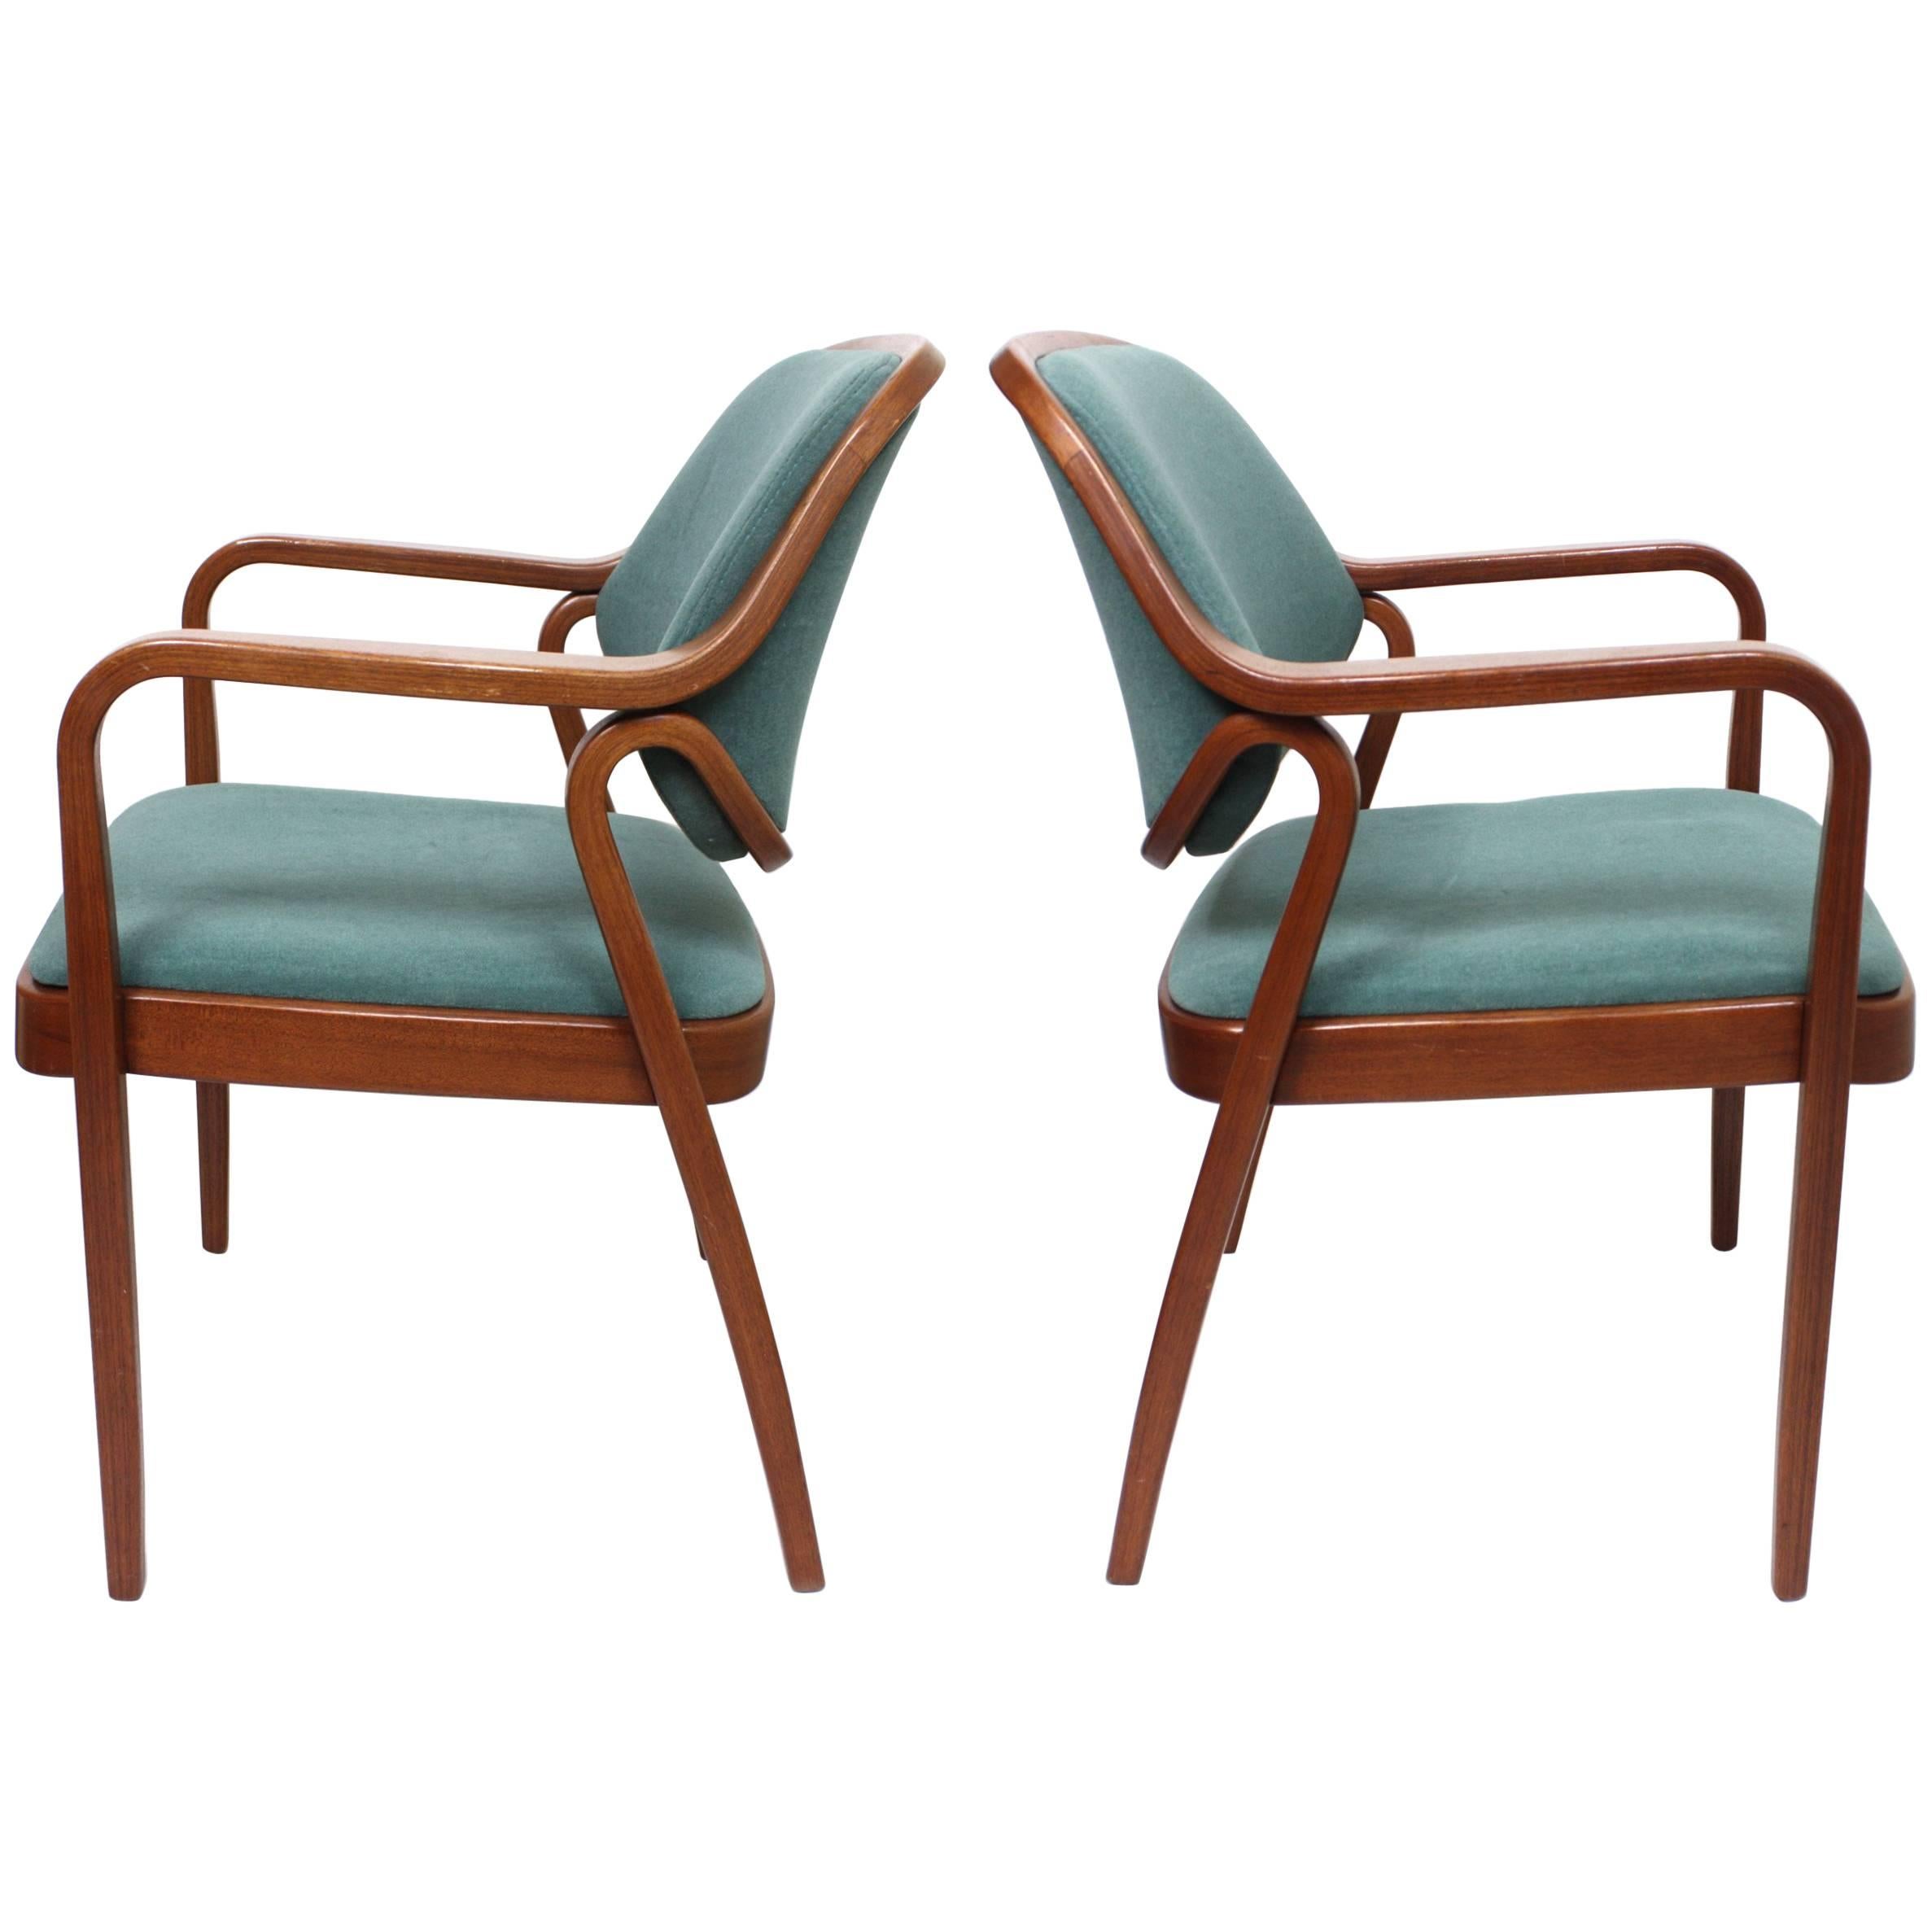 Pair of Mid-Century Modern Bentwood Mahogany Side Chairs by Don Pettit for Knoll